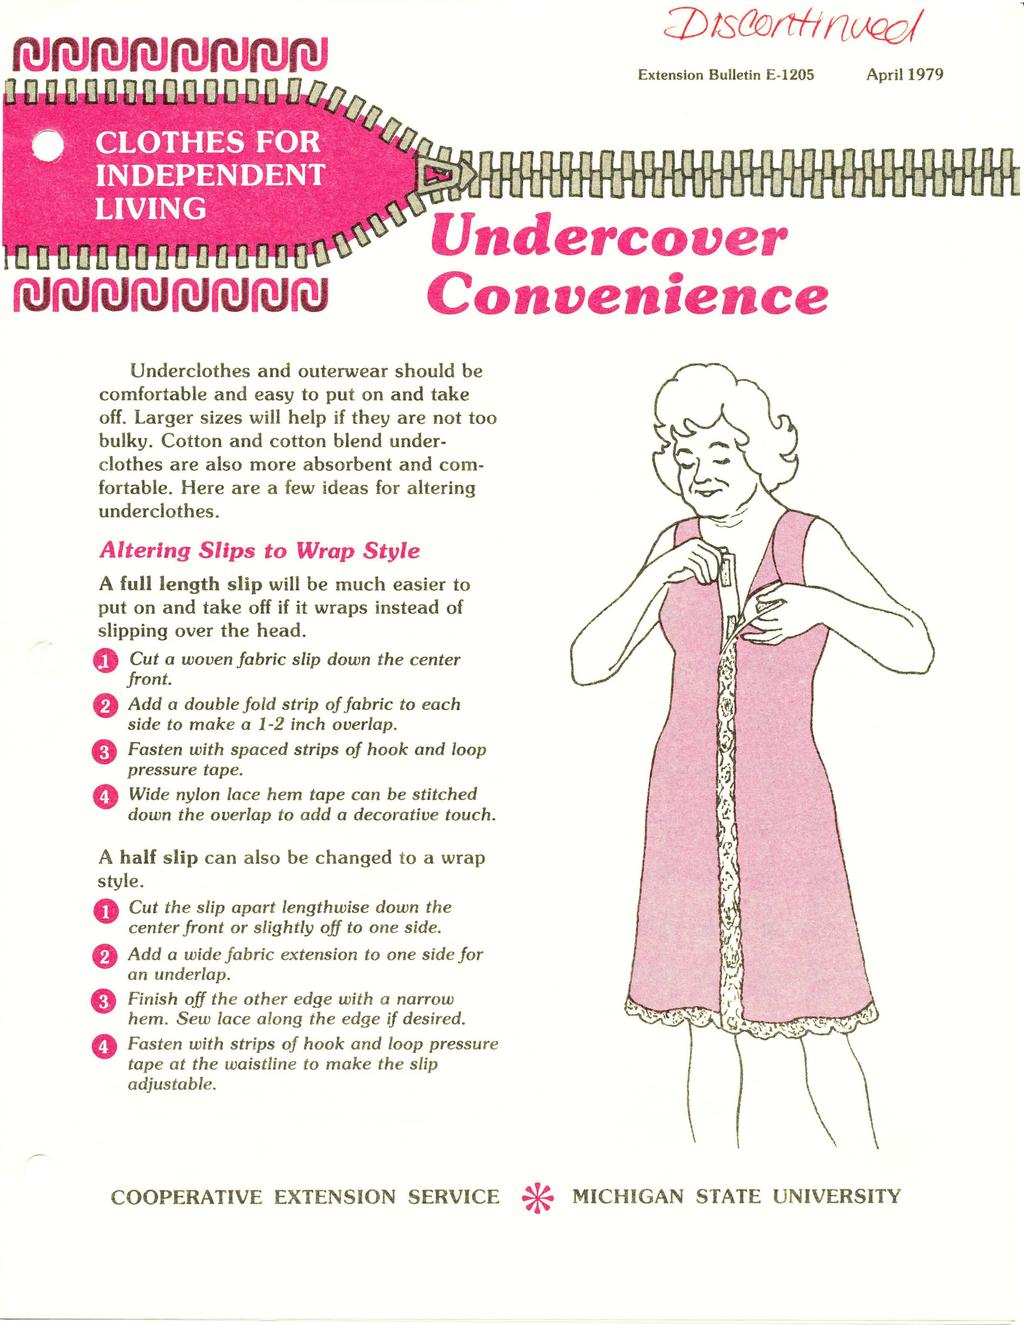 Extensin Bulletin E-1205 April 1979 Underclthes and uterwear shuld be cmfrtable and easy t put n and take ff. Larger sizes will help if they are nt t bulky.